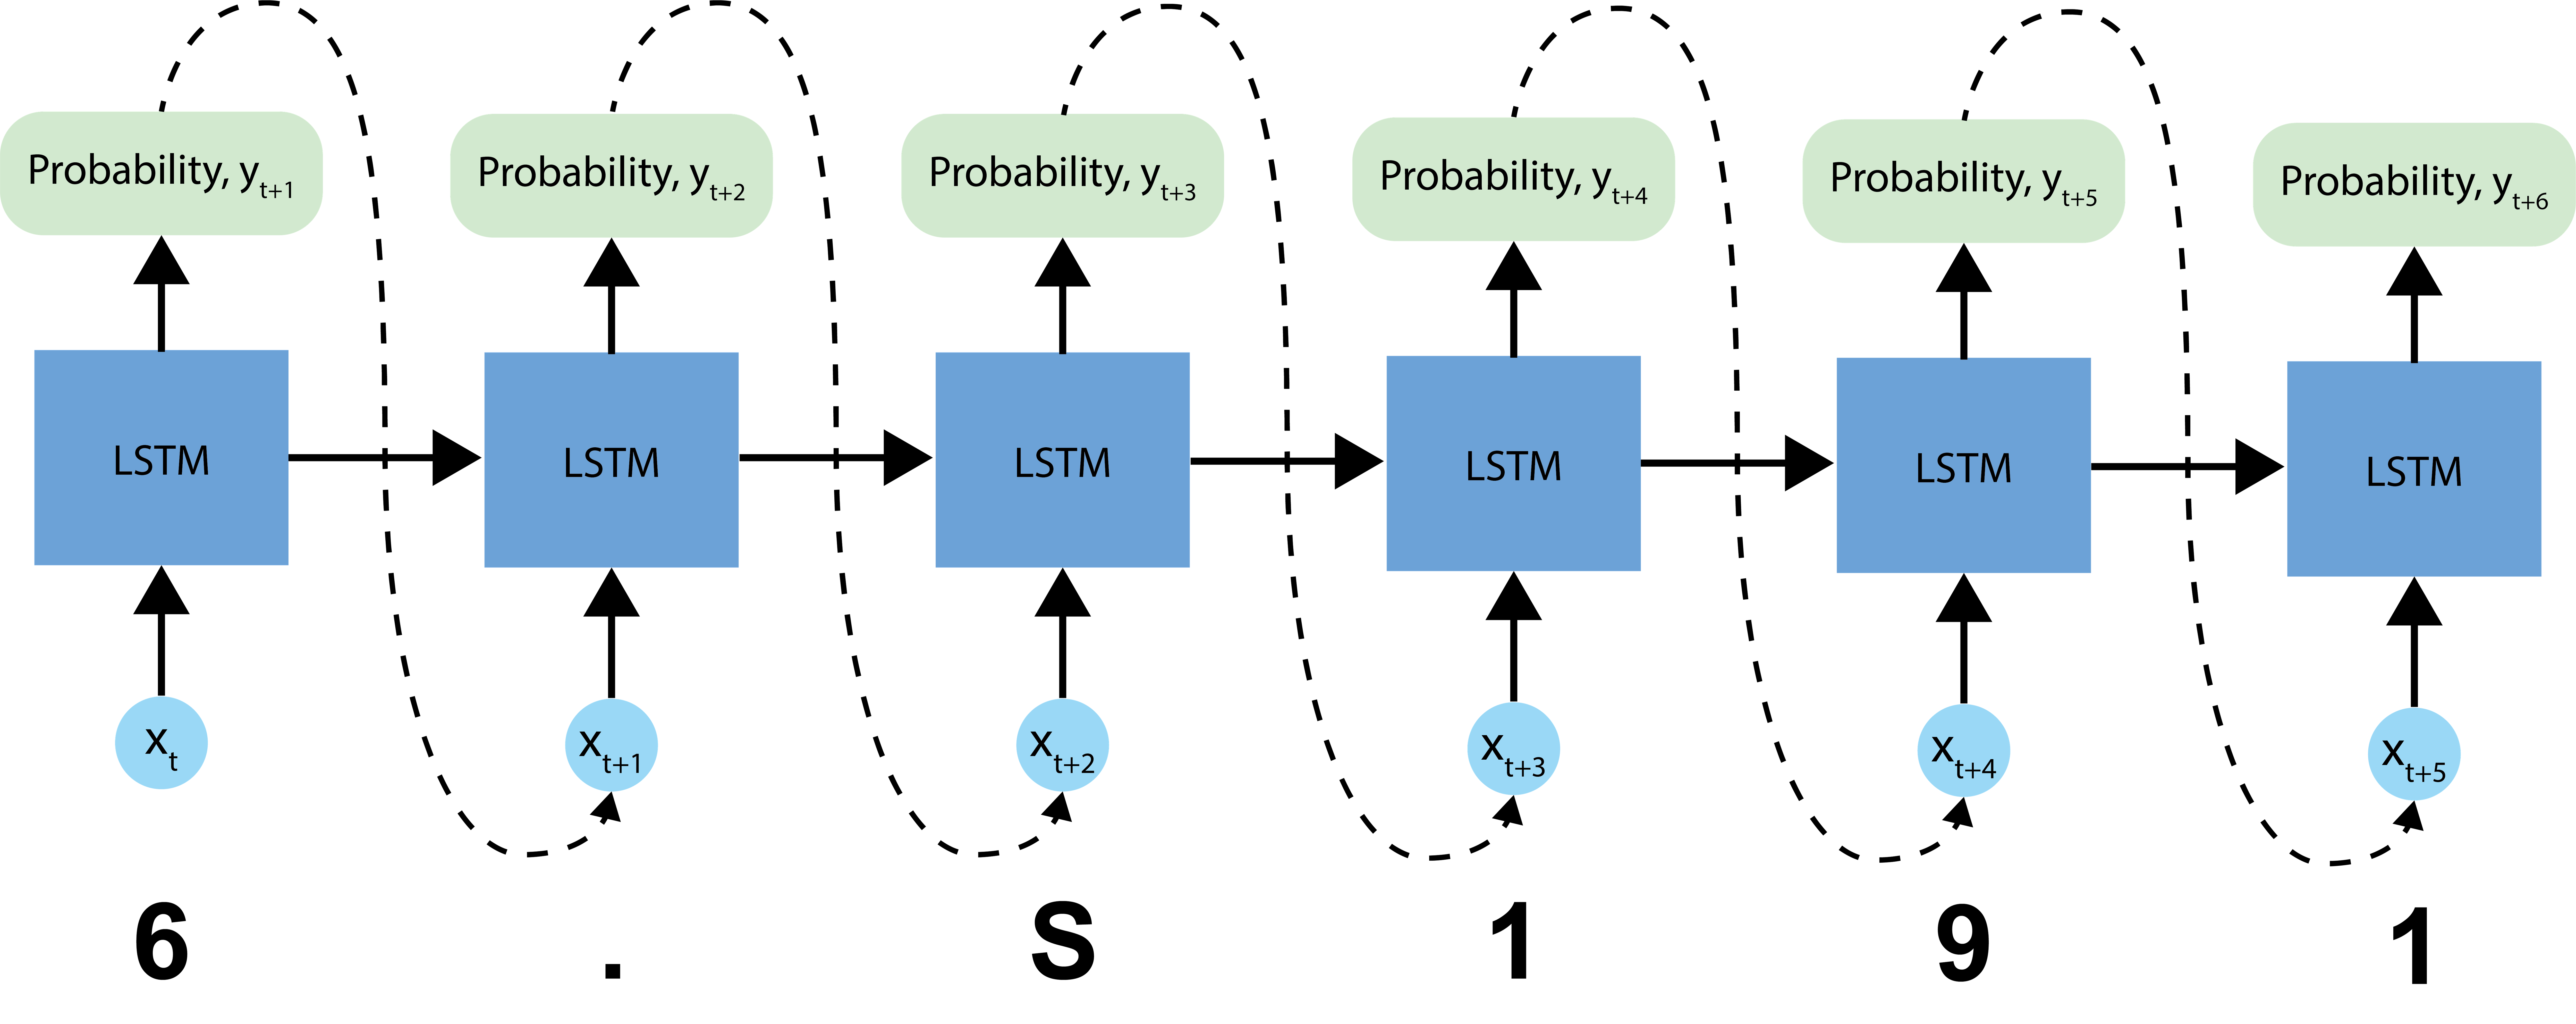 LSTM inference